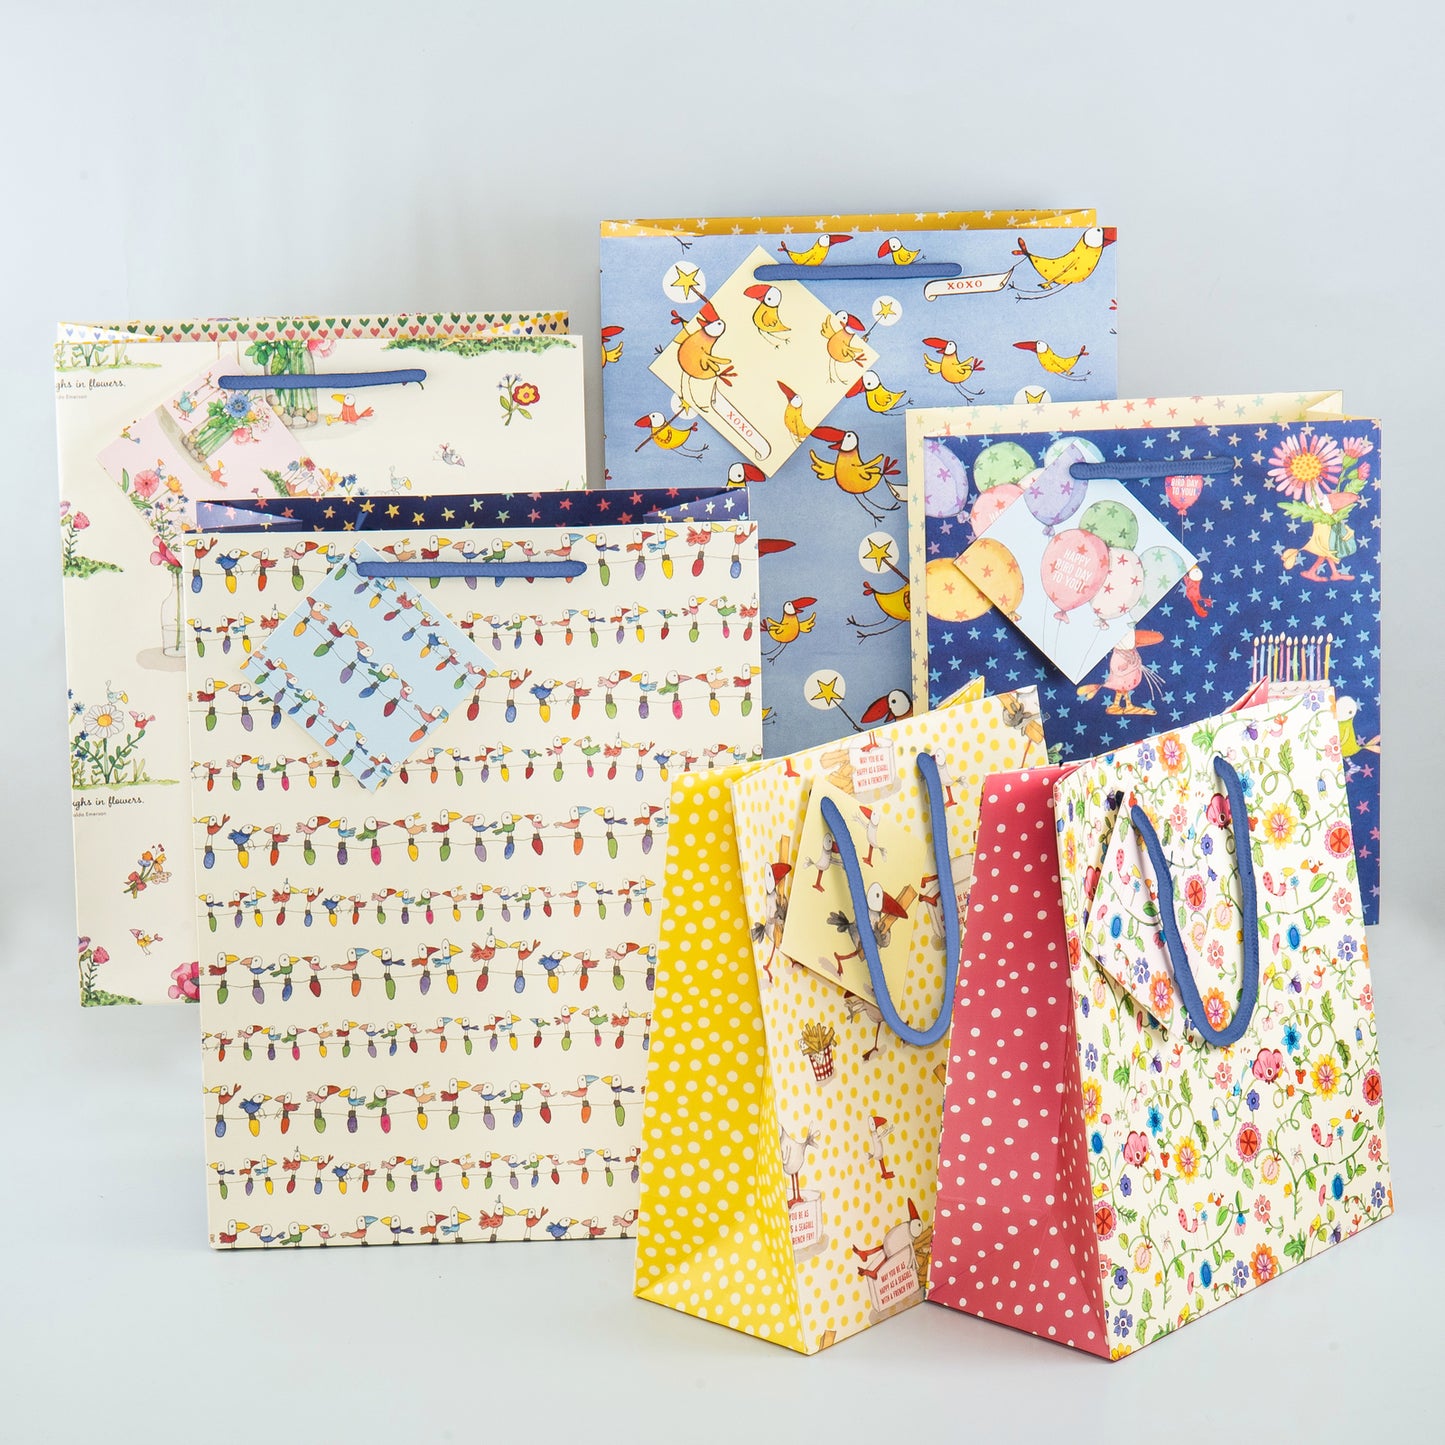 Twigseeds Gift Bag Large - Happy Bird Day Party